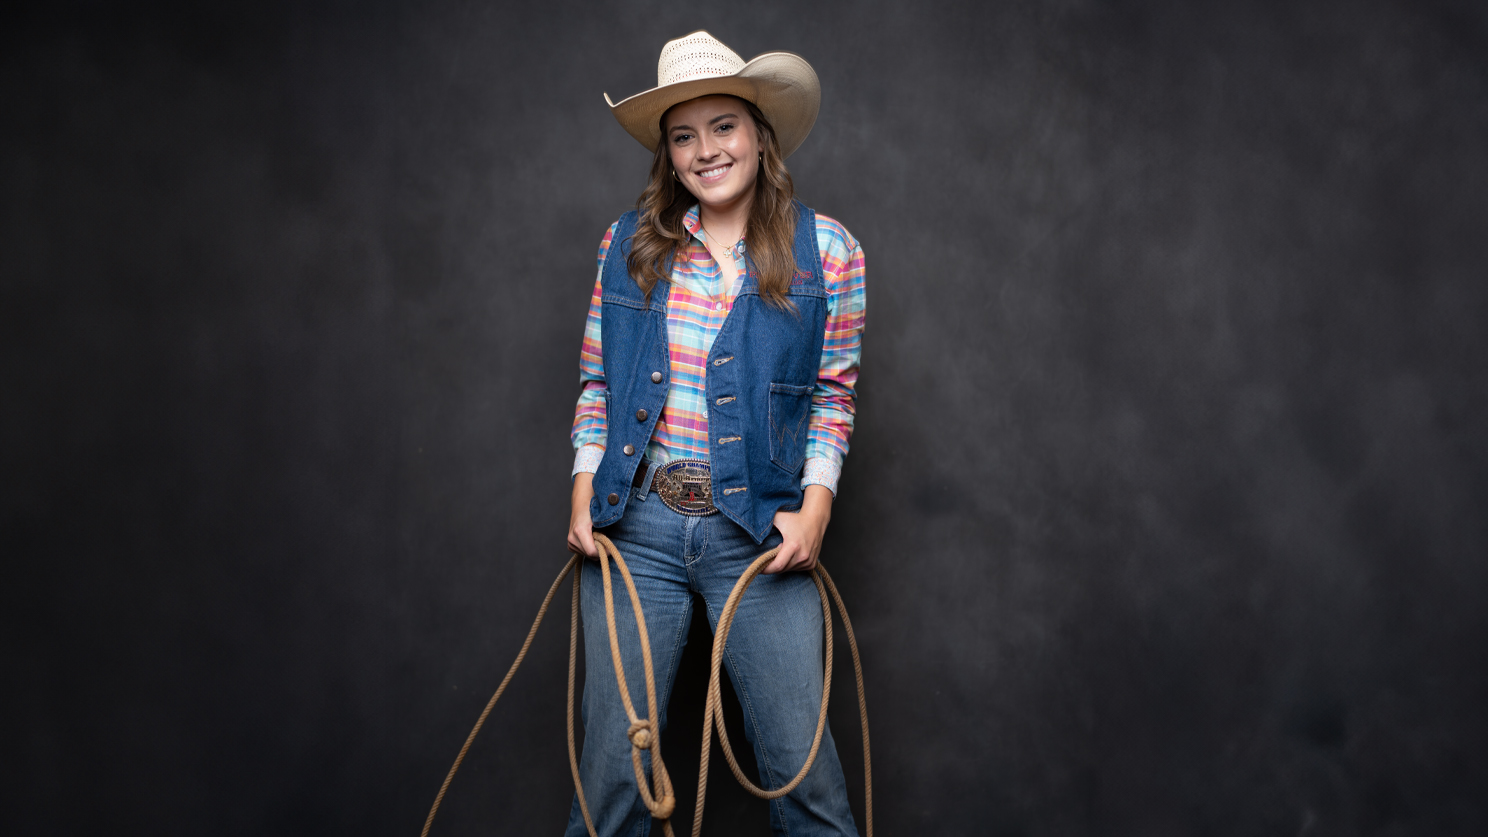 Pearl River women earn second place at Murray State rodeo